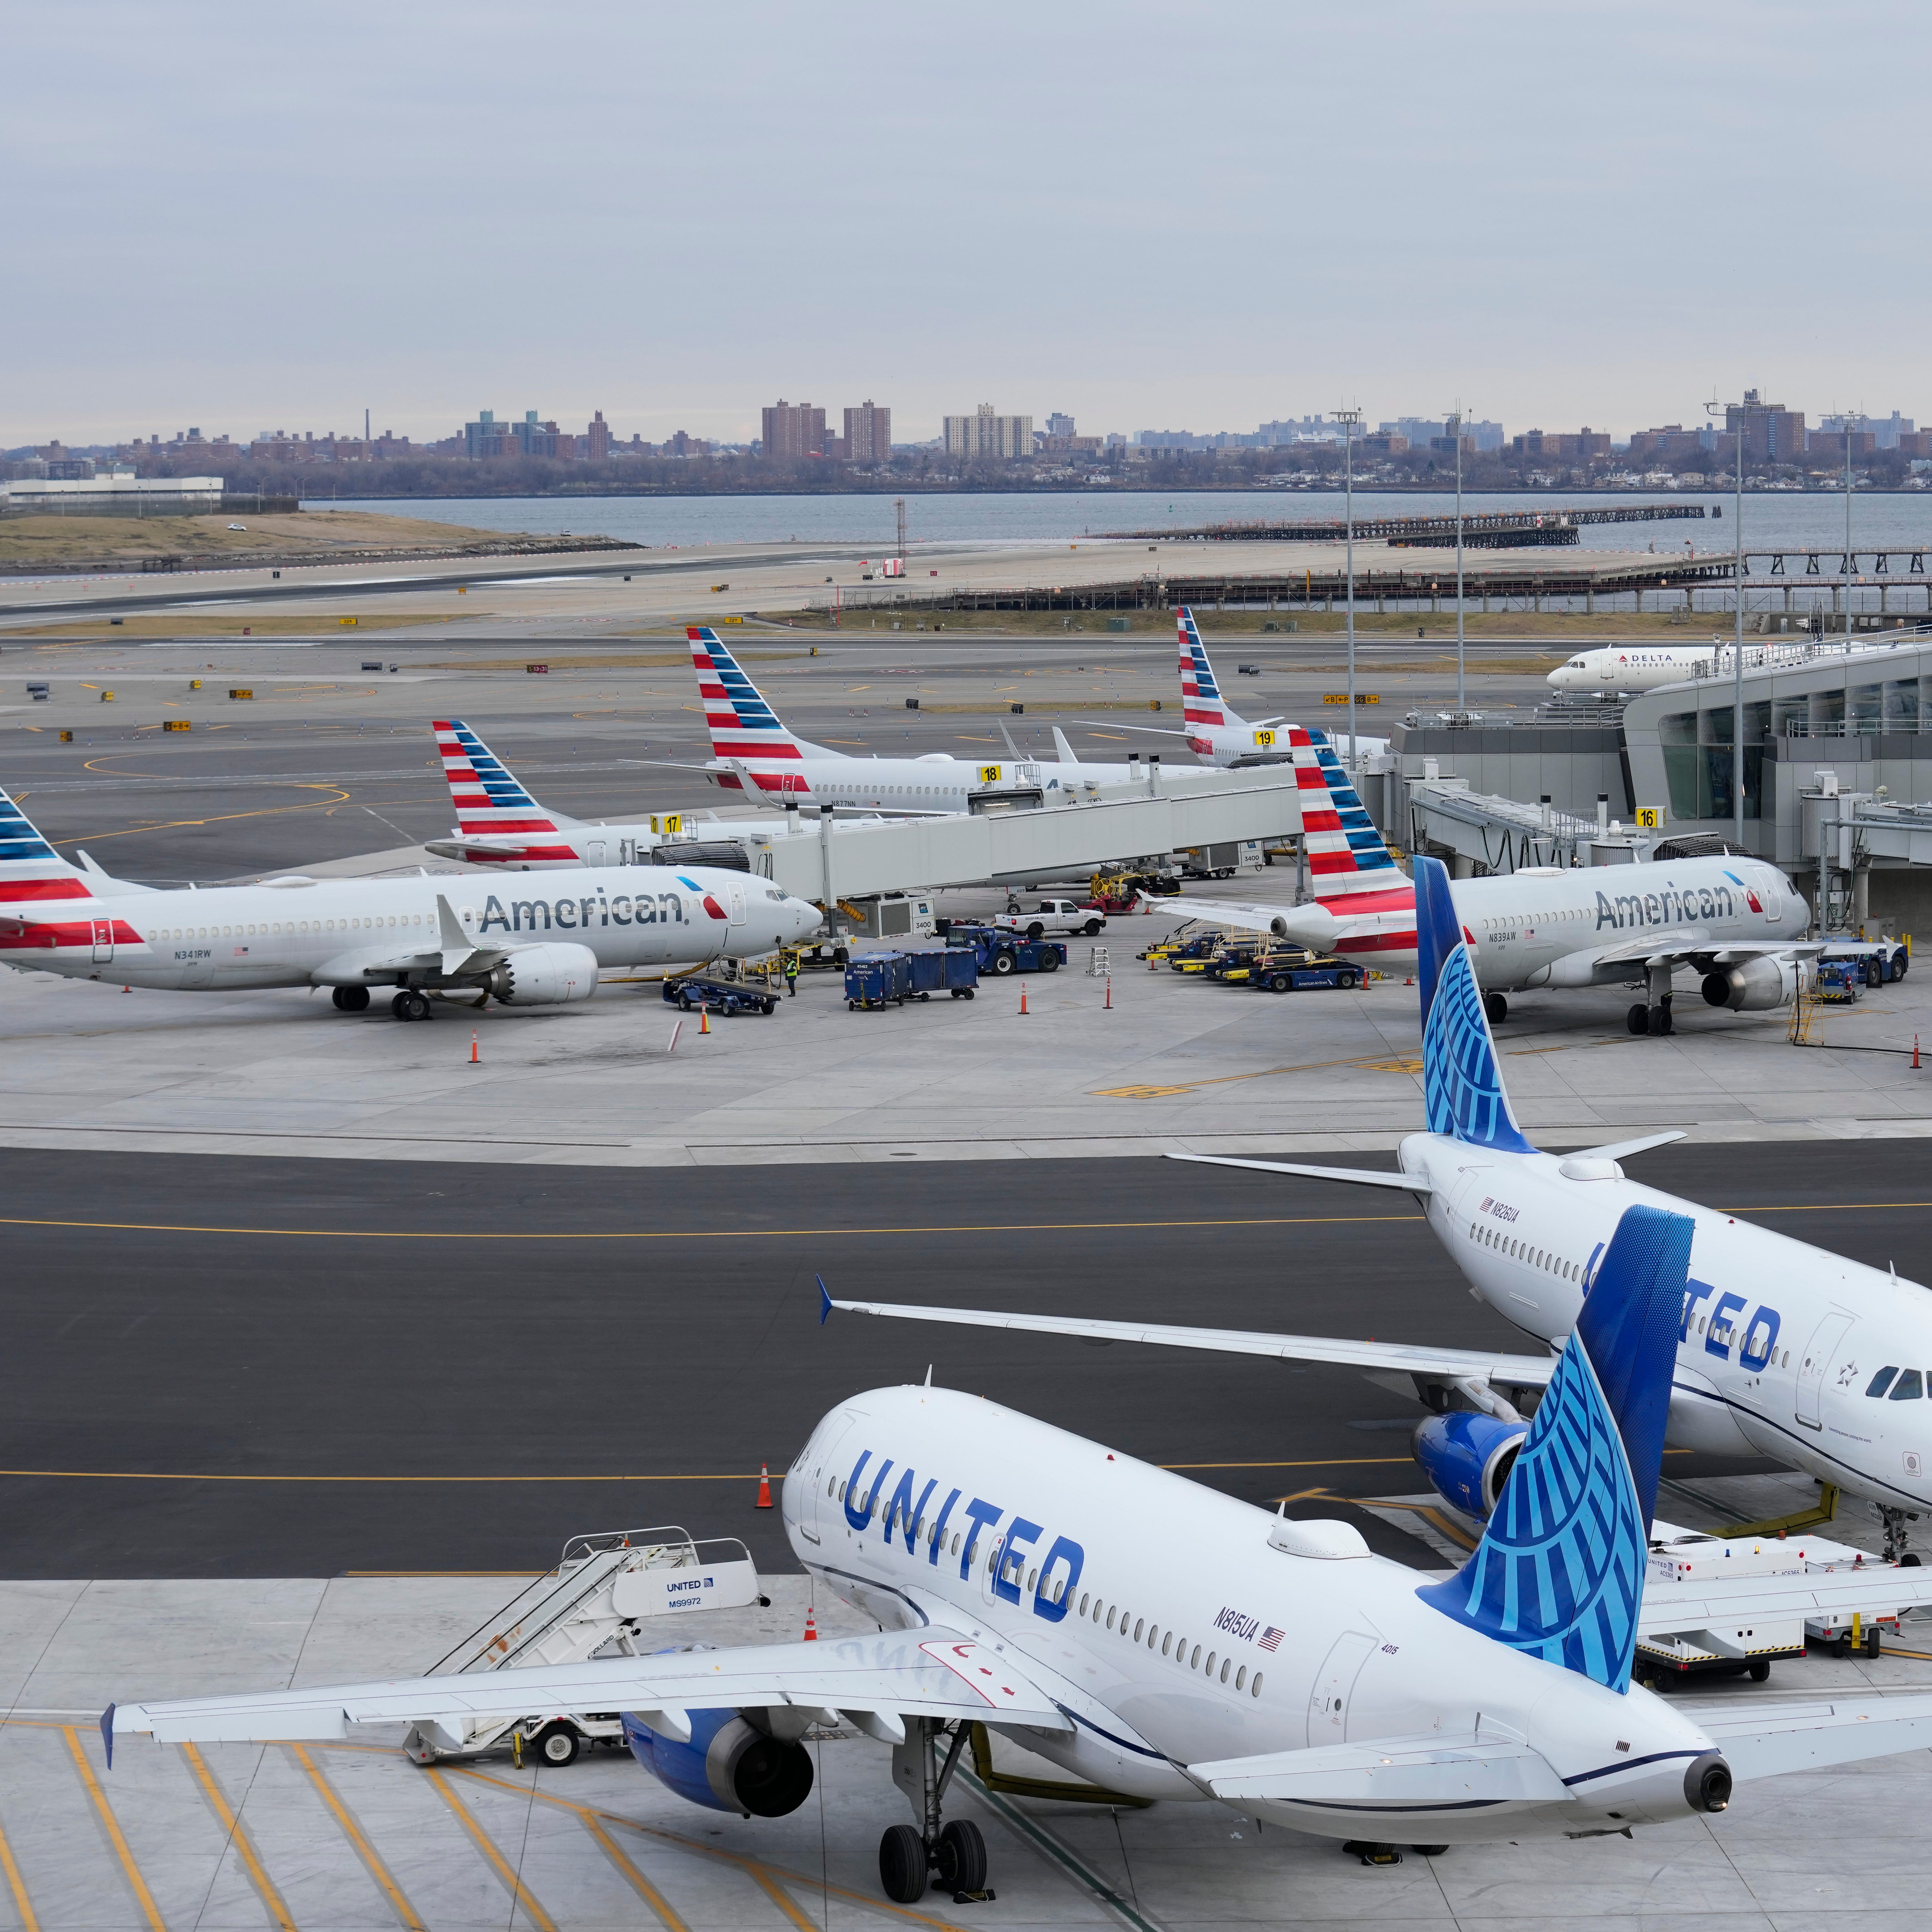 Planes sit on the tarmac at Terminal B at LaGuardia Airport in New York, Wednesday, Jan. 11, 2023.